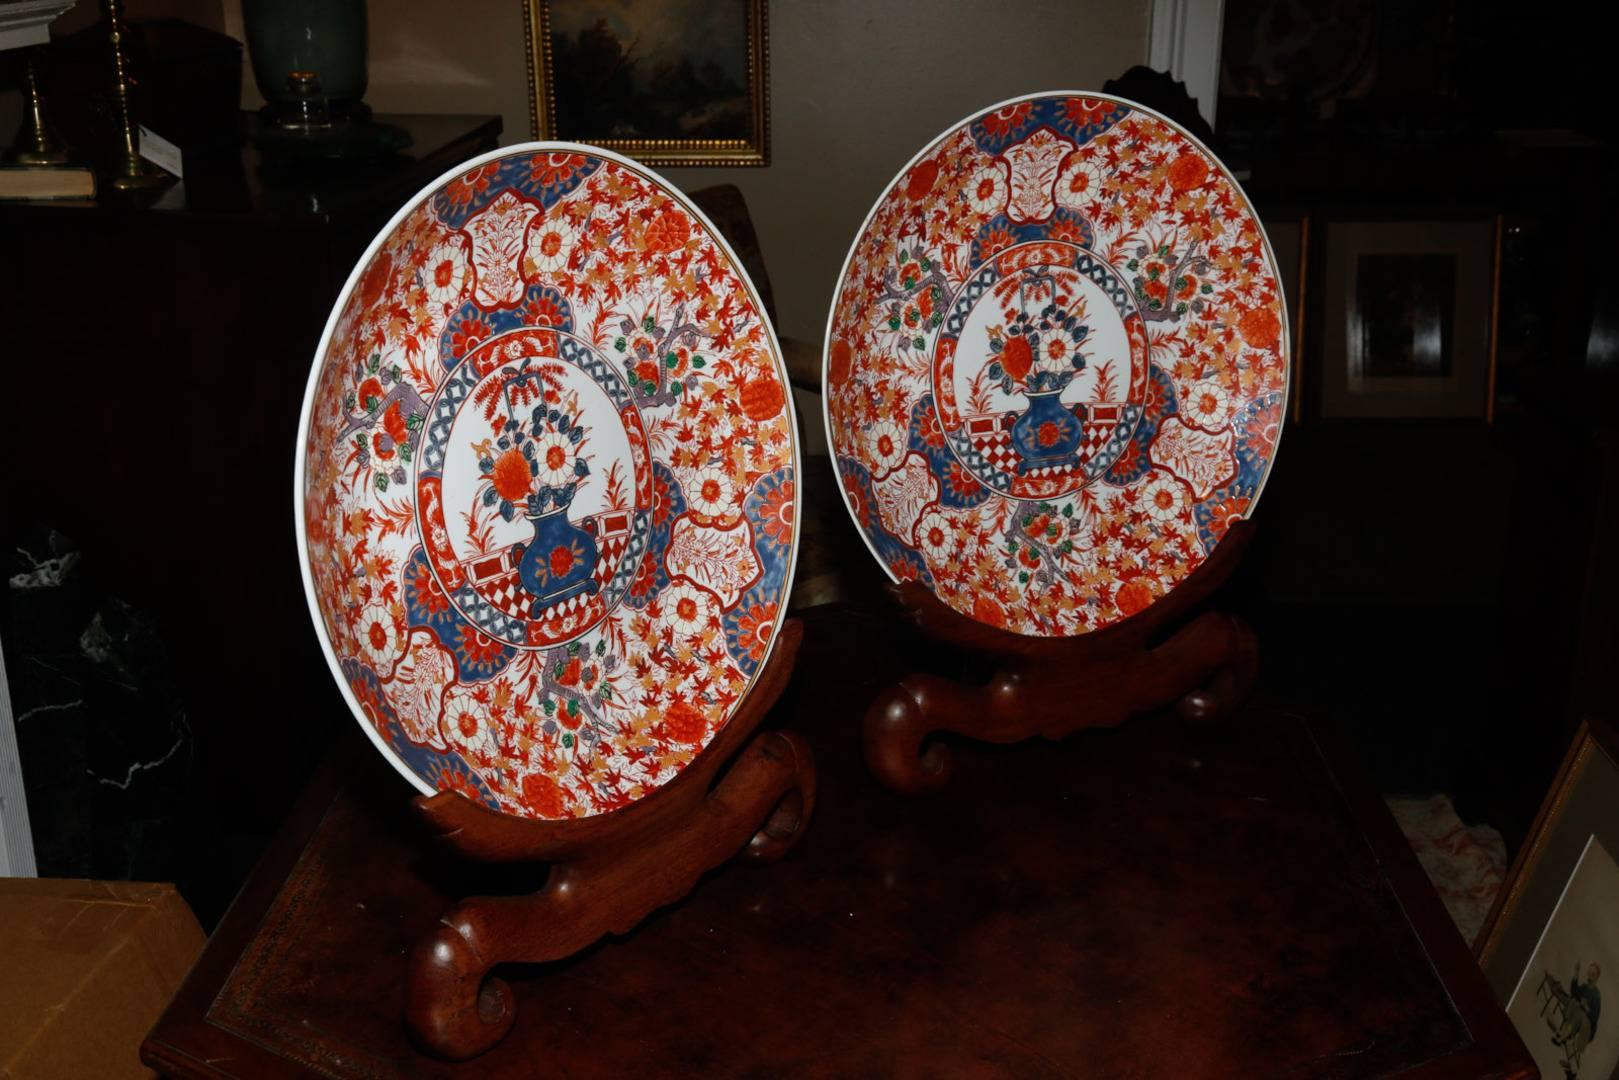 Pair of Chinese early 20th century, possibly late Qing dynasty chargers in the Imari palette. Featuring a central ground decorated with a vase and flowers surrounded by a band and an outer field of foliate designs with three cartouche panels. Wood